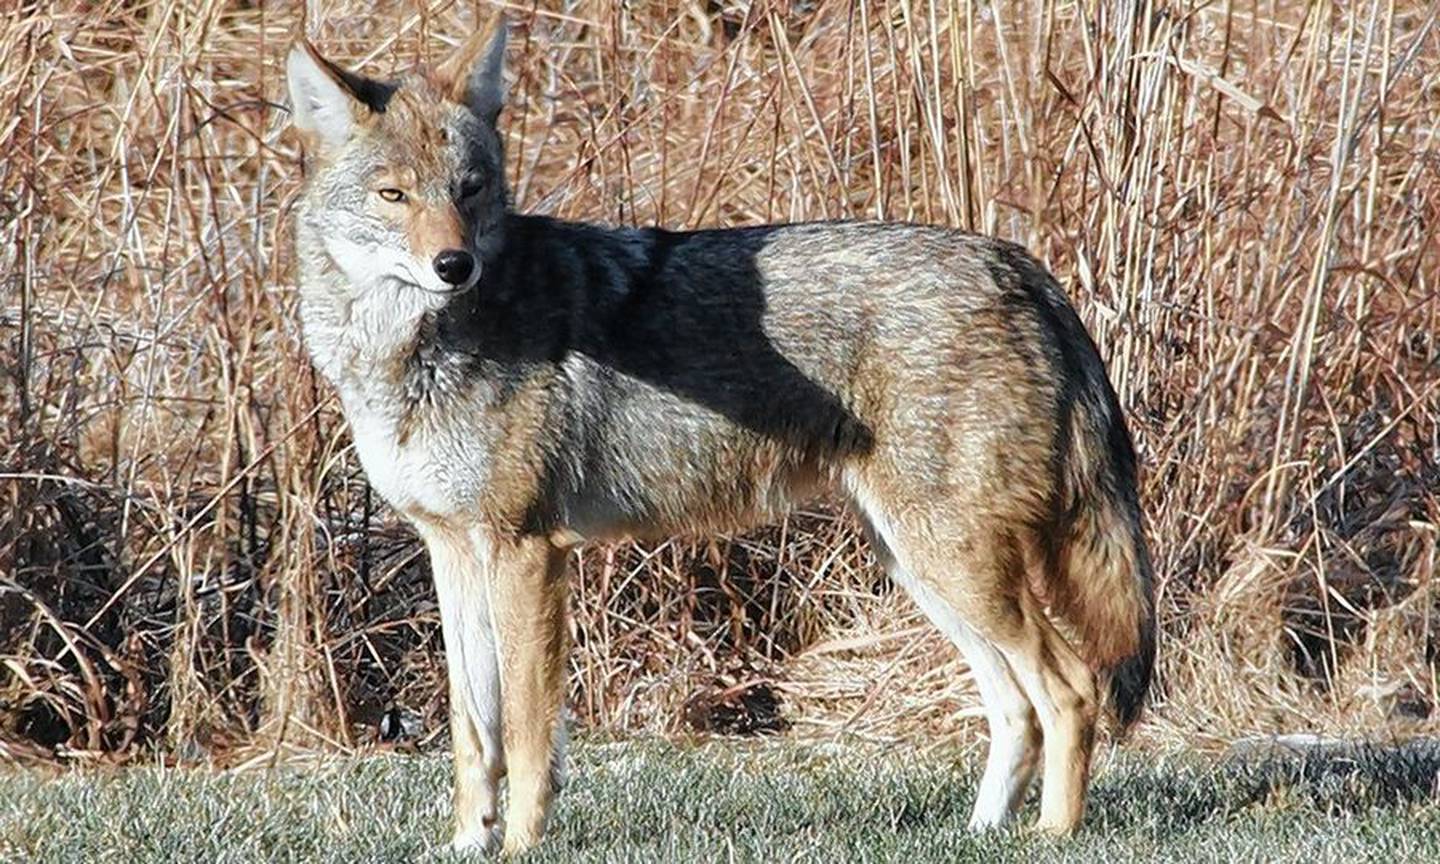 A coyote lurks at Danada Forest Preserve in Wheaton. While always present, coyotes are more visible this time of year as youngsters look for mates and new homes.